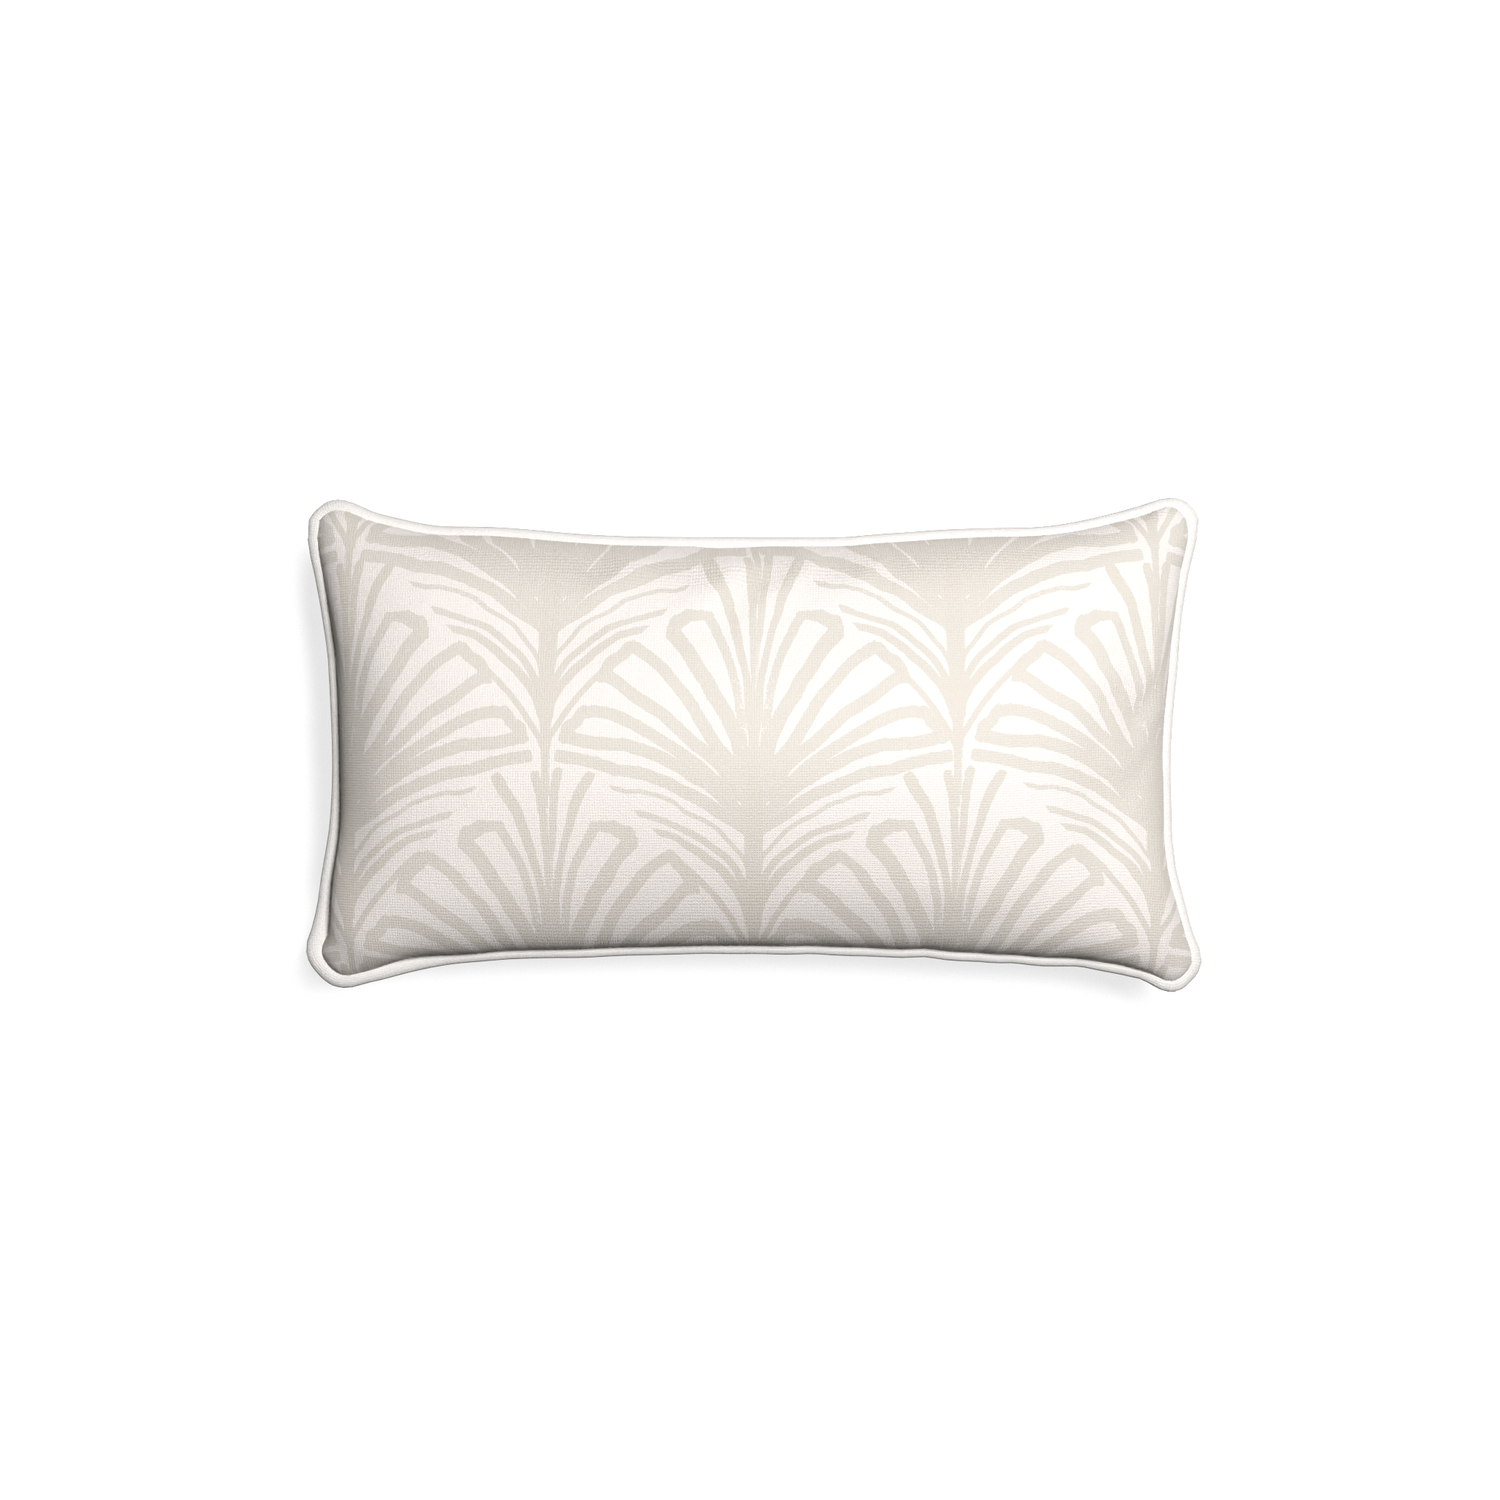 Petite-lumbar suzy sand custom beige palmpillow with snow piping on white background